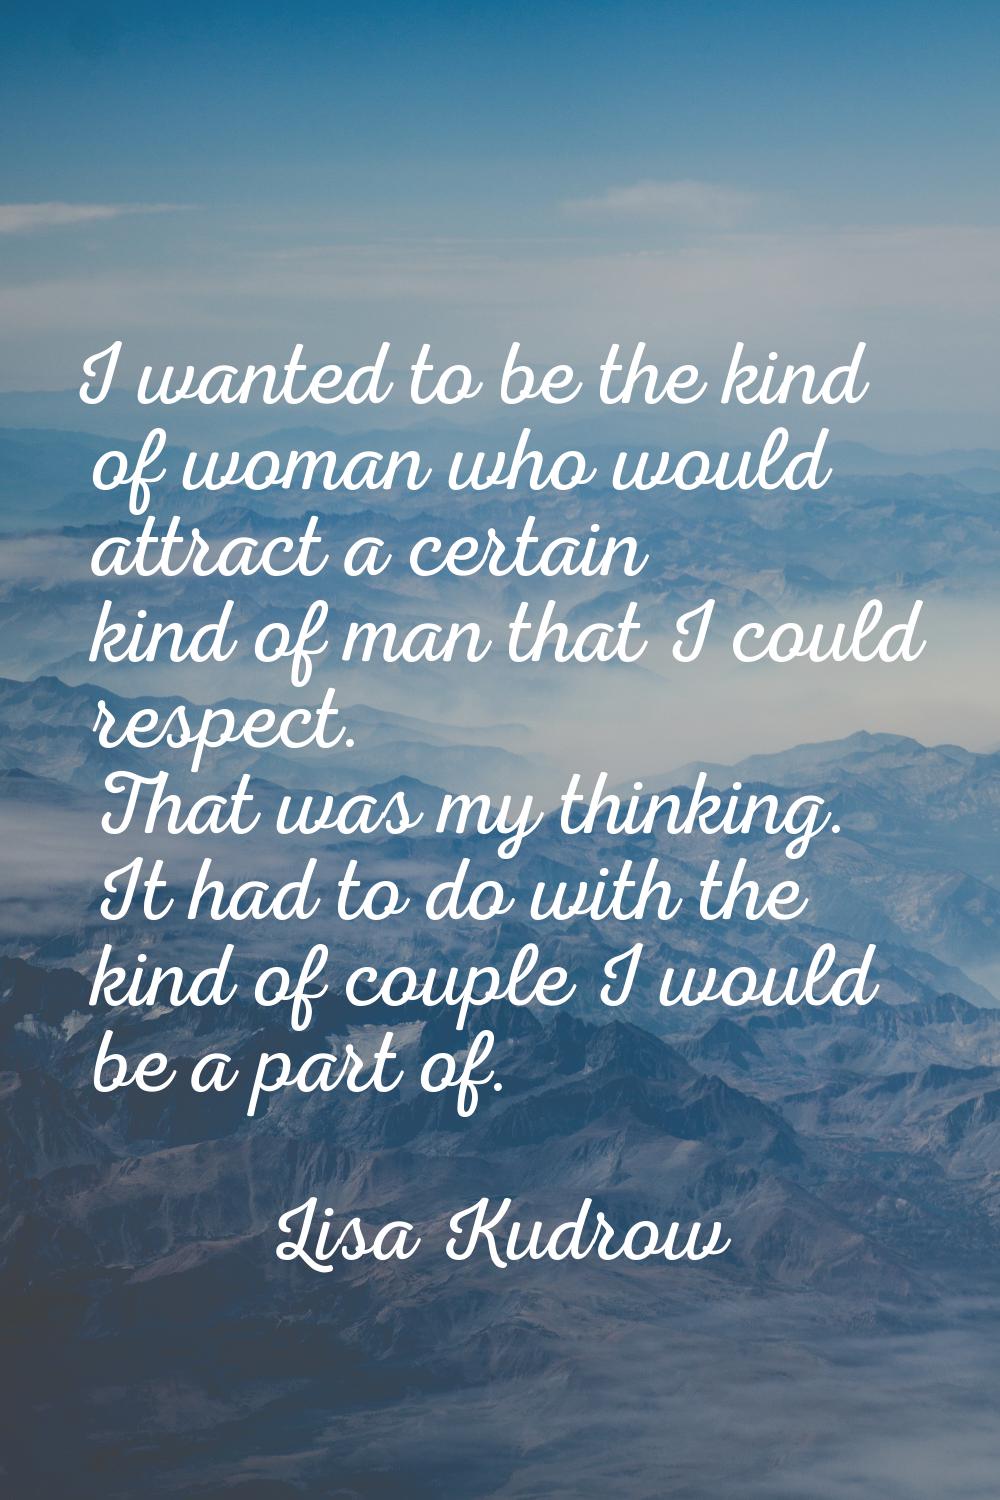 I wanted to be the kind of woman who would attract a certain kind of man that I could respect. That